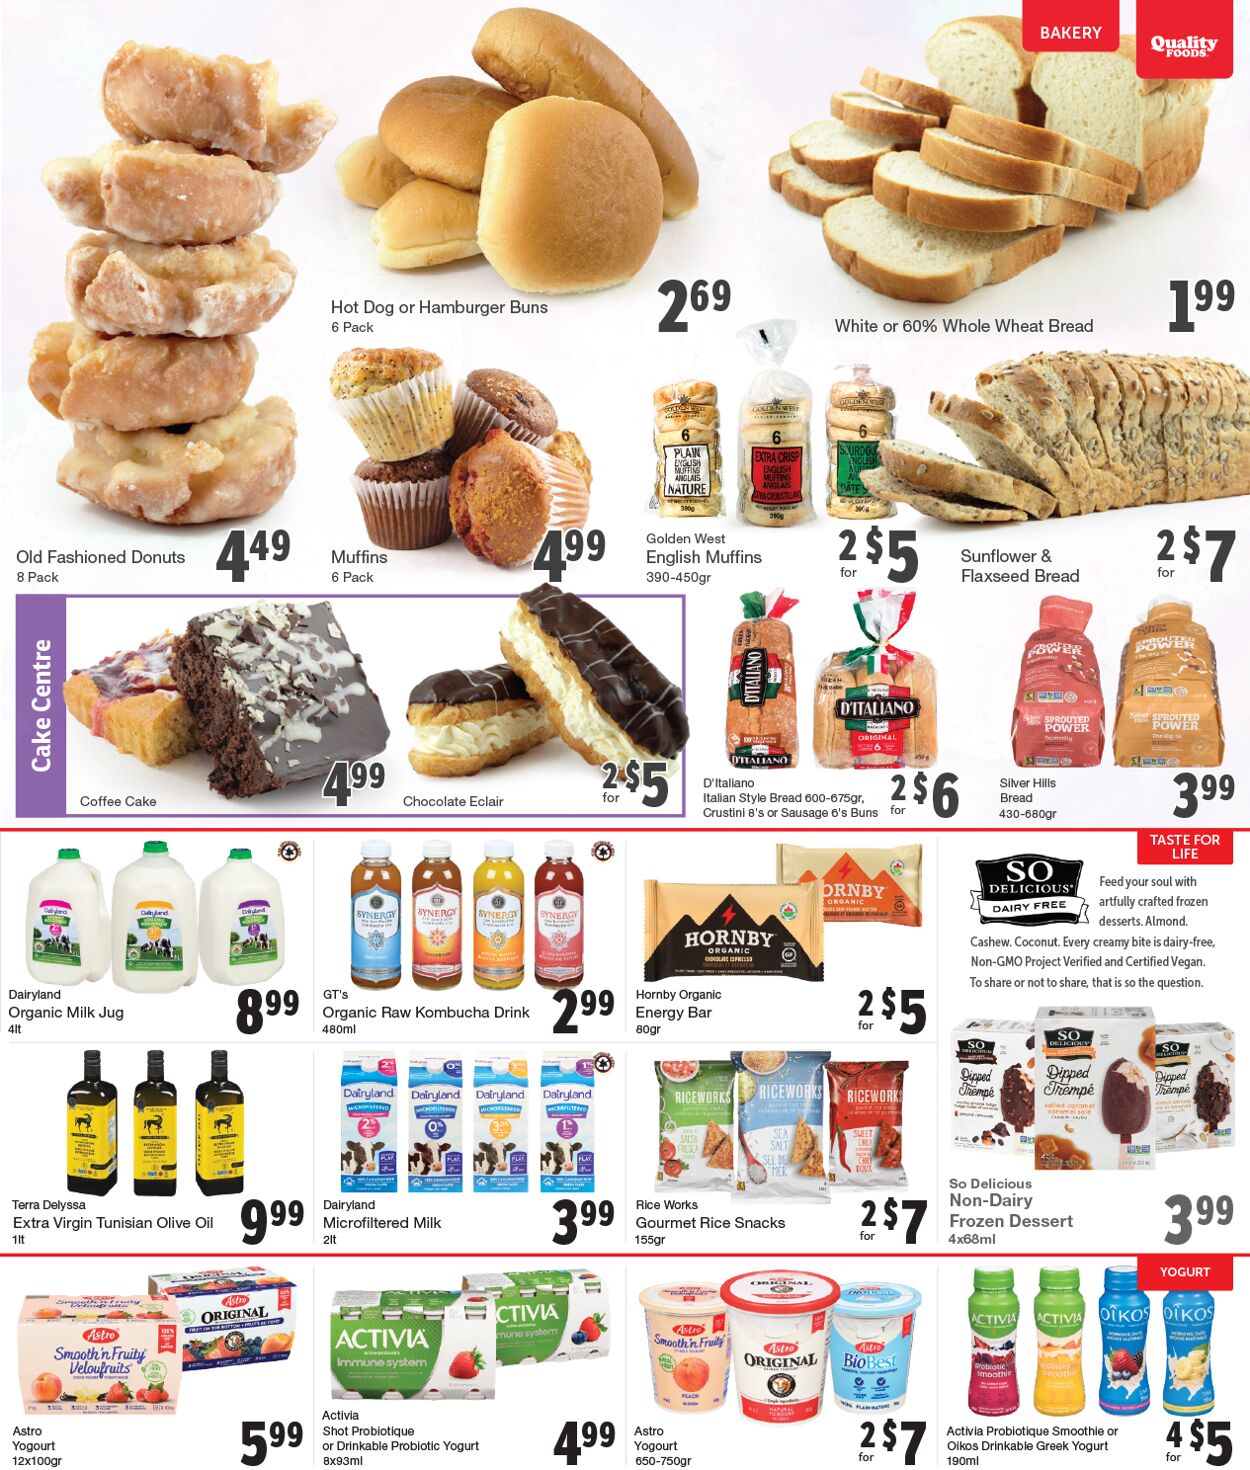 Flyer Quality Foods 16.05.2022 - 22.05.2022